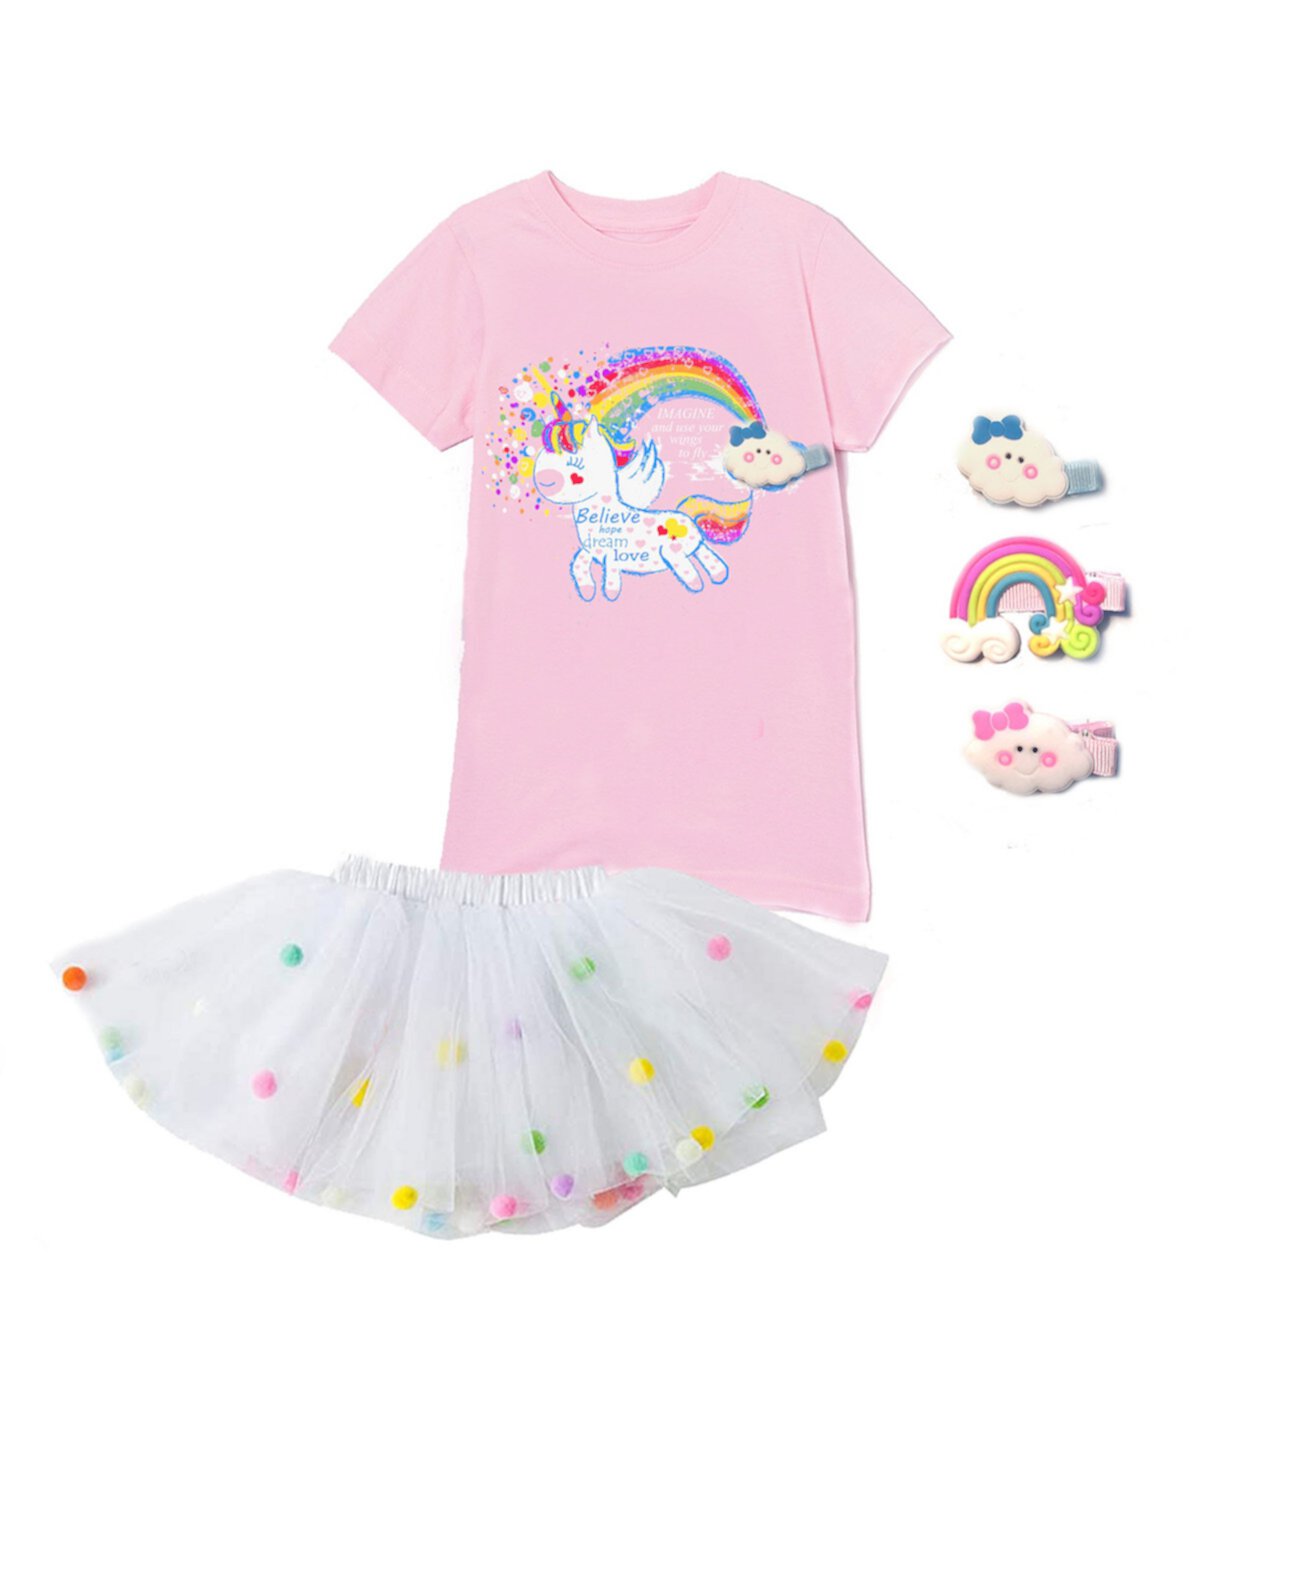 Little Girls Interchangeable Unicorn and Cloud Graphic Top and Skirt Set, 5 Piece Mi Amore Gigi